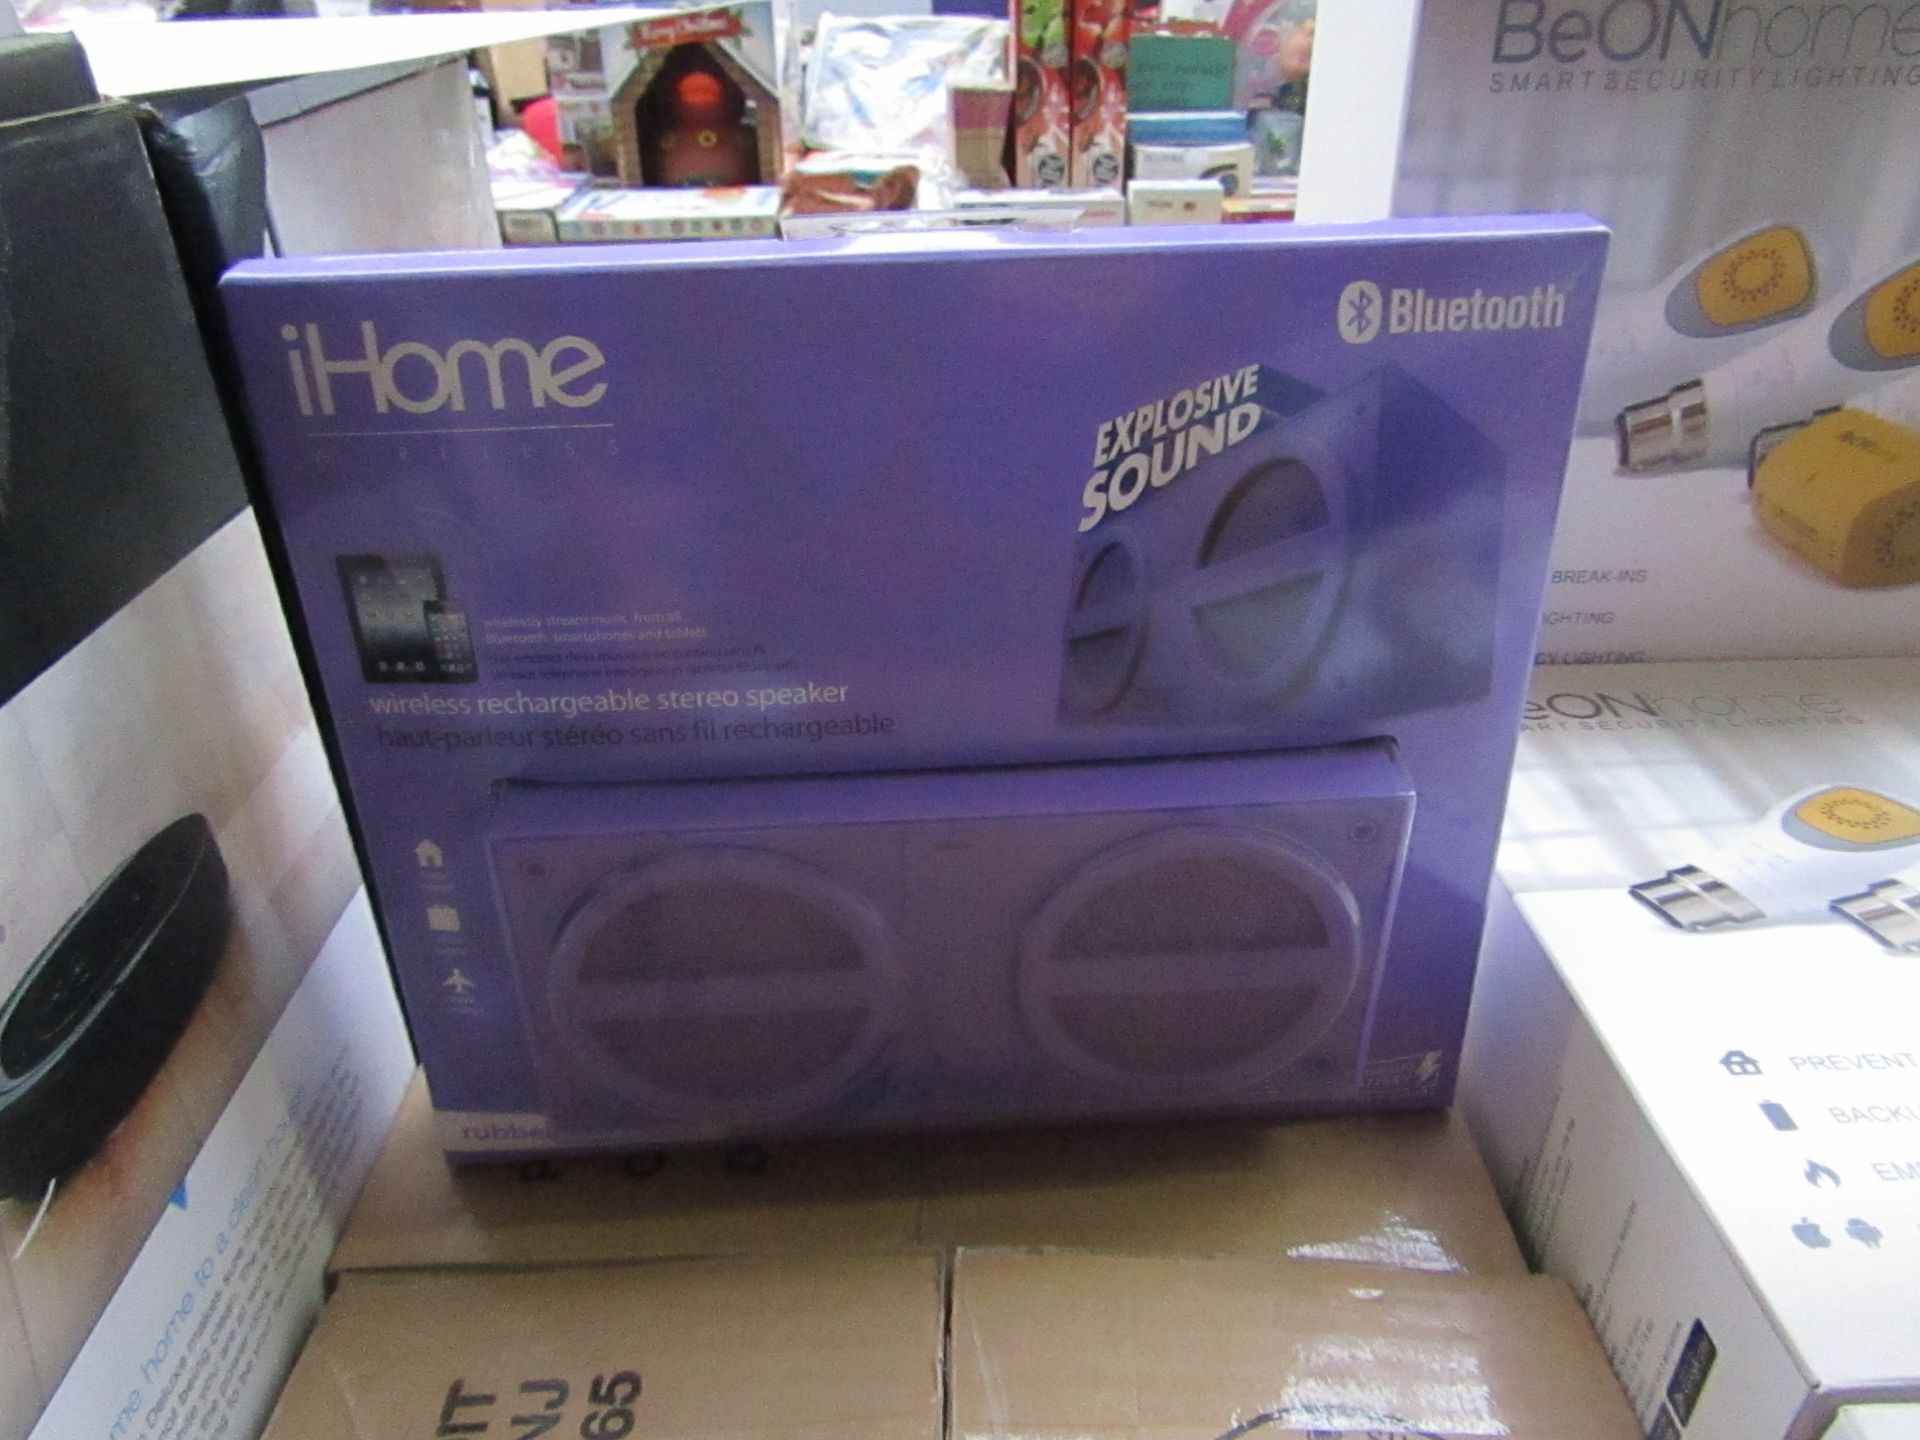 2x Ihome - Wireless Rechargable Stereo Speaker (Purple) - New & Boxed.